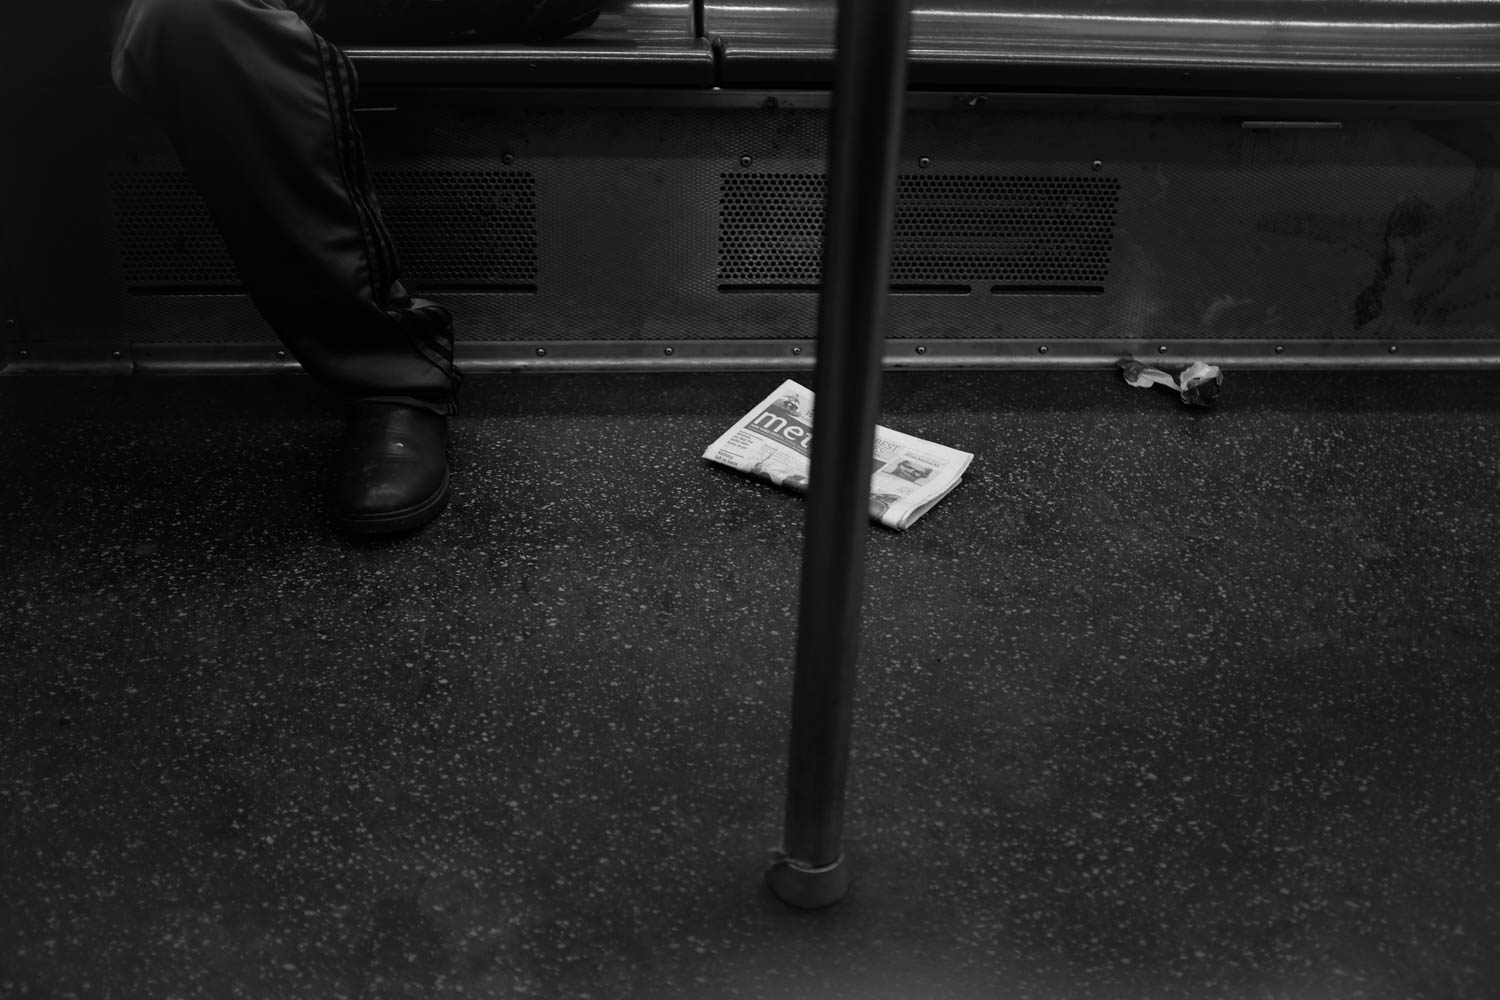 A black and white photograph of a newspaper on the floor of a subway car.